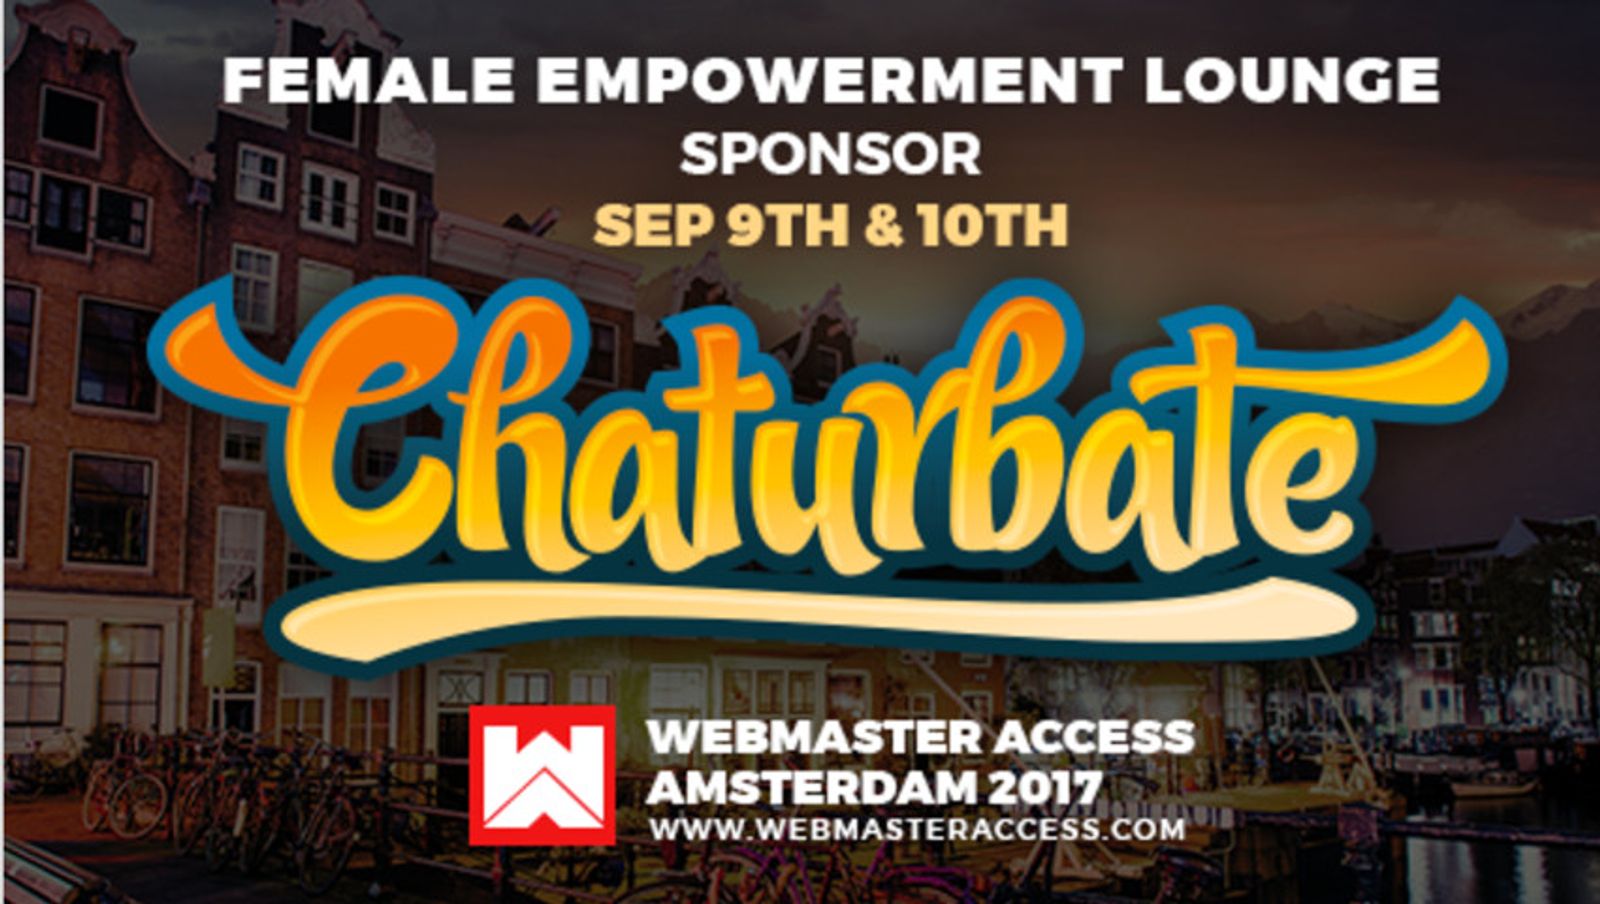 Chaturbate Female Empowerment Lounge Returns to Webmaster Access